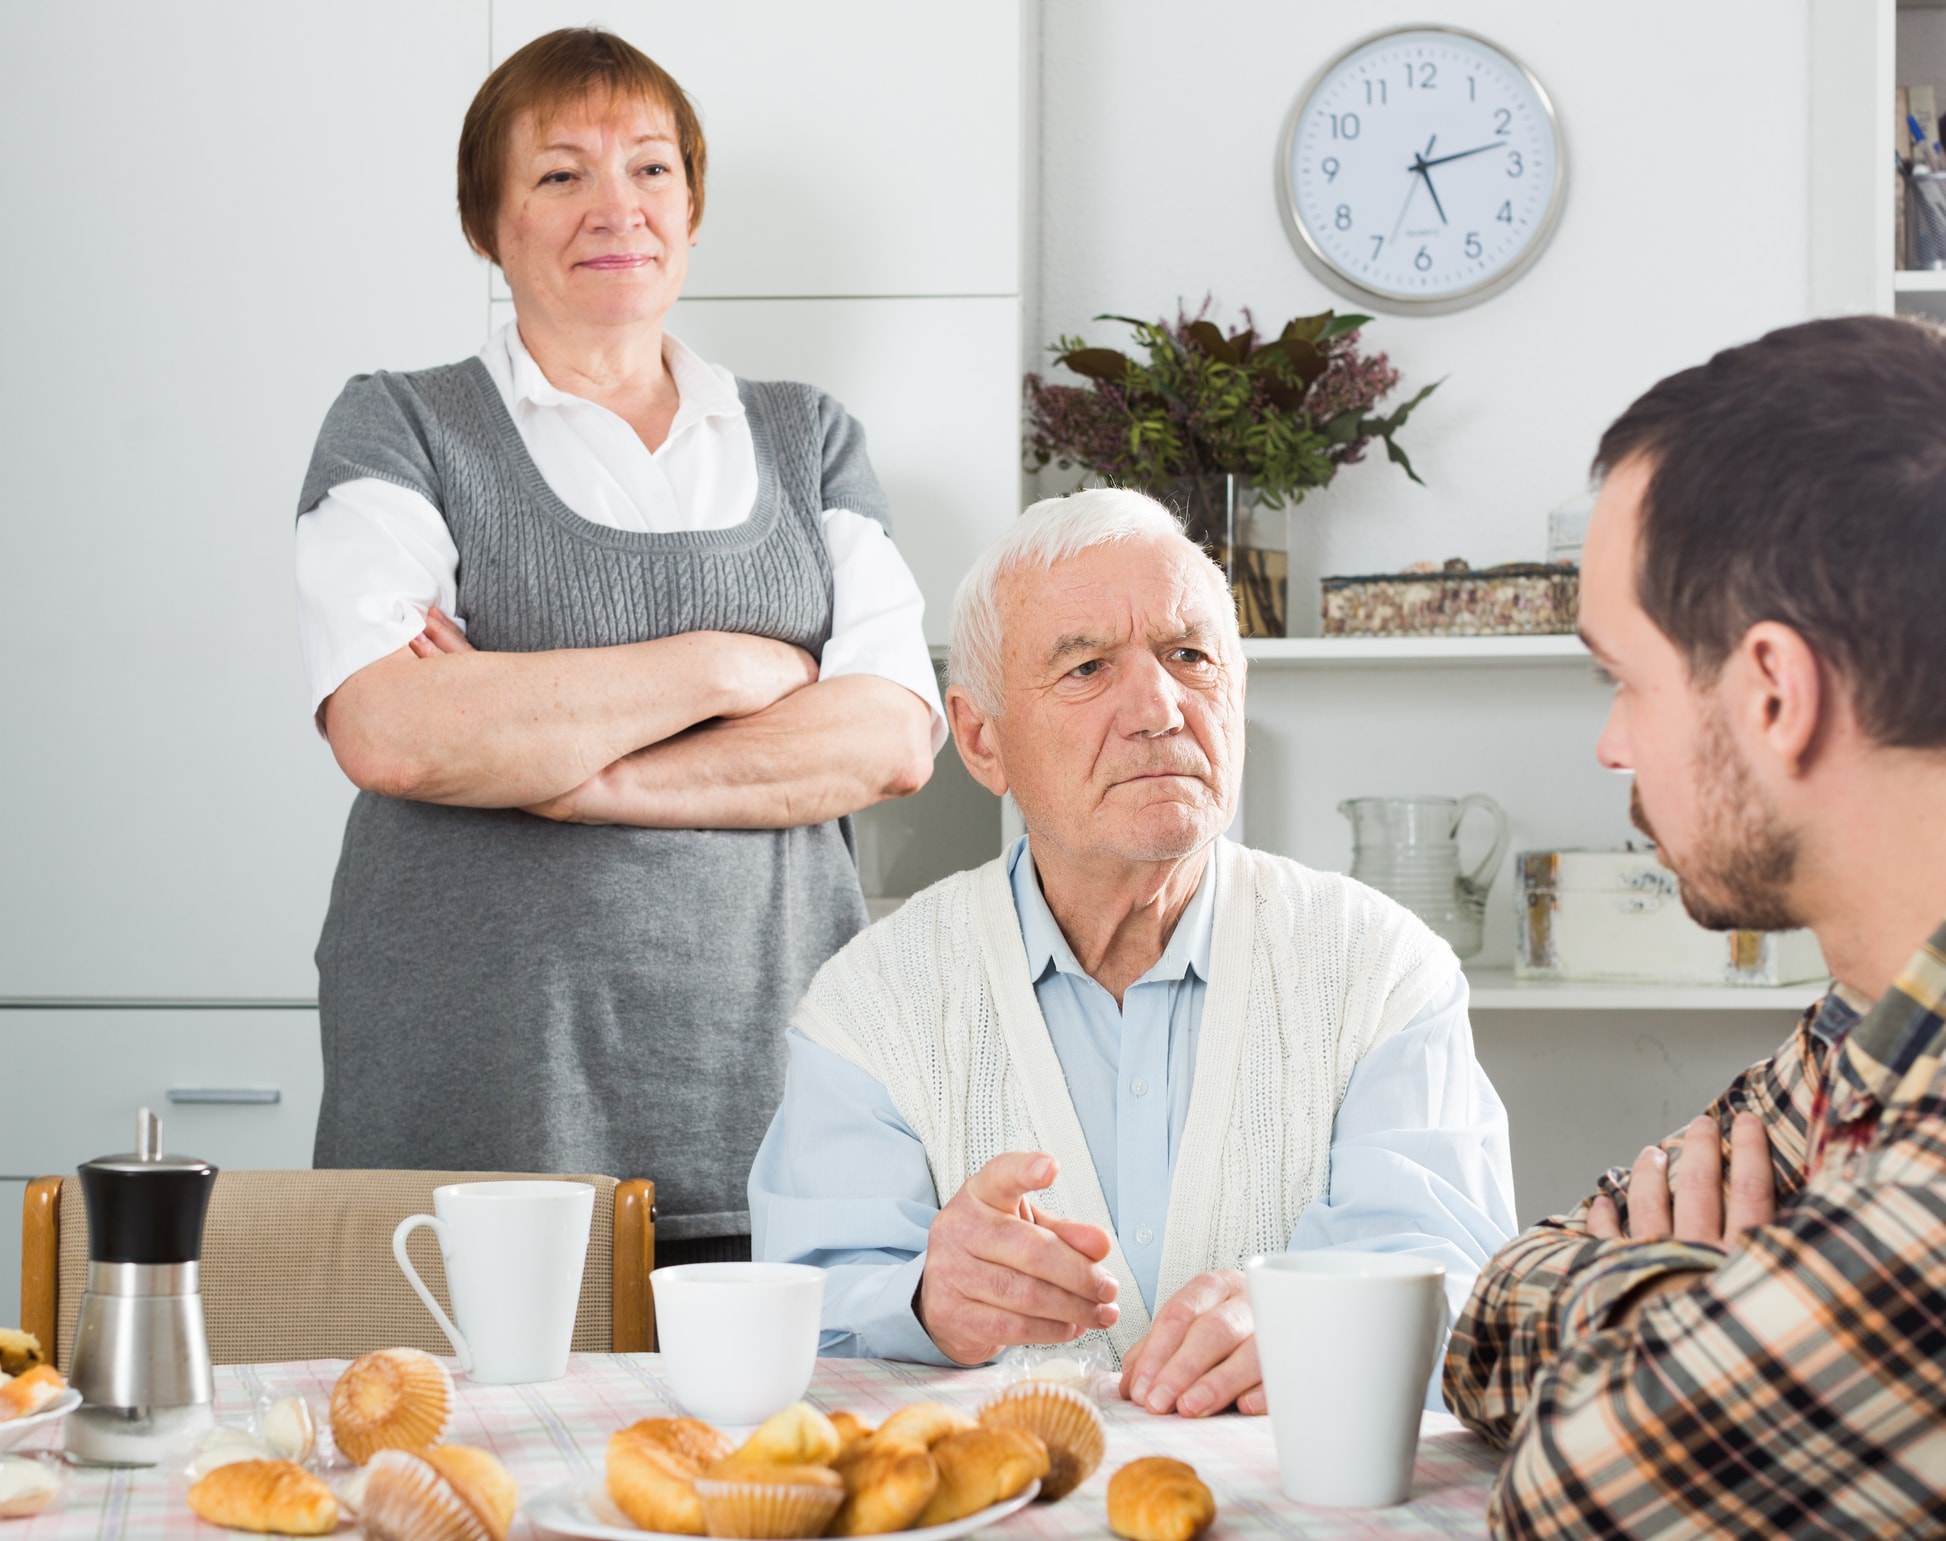 5 ways to maintain healthy family relationships when caring for an aging loved one